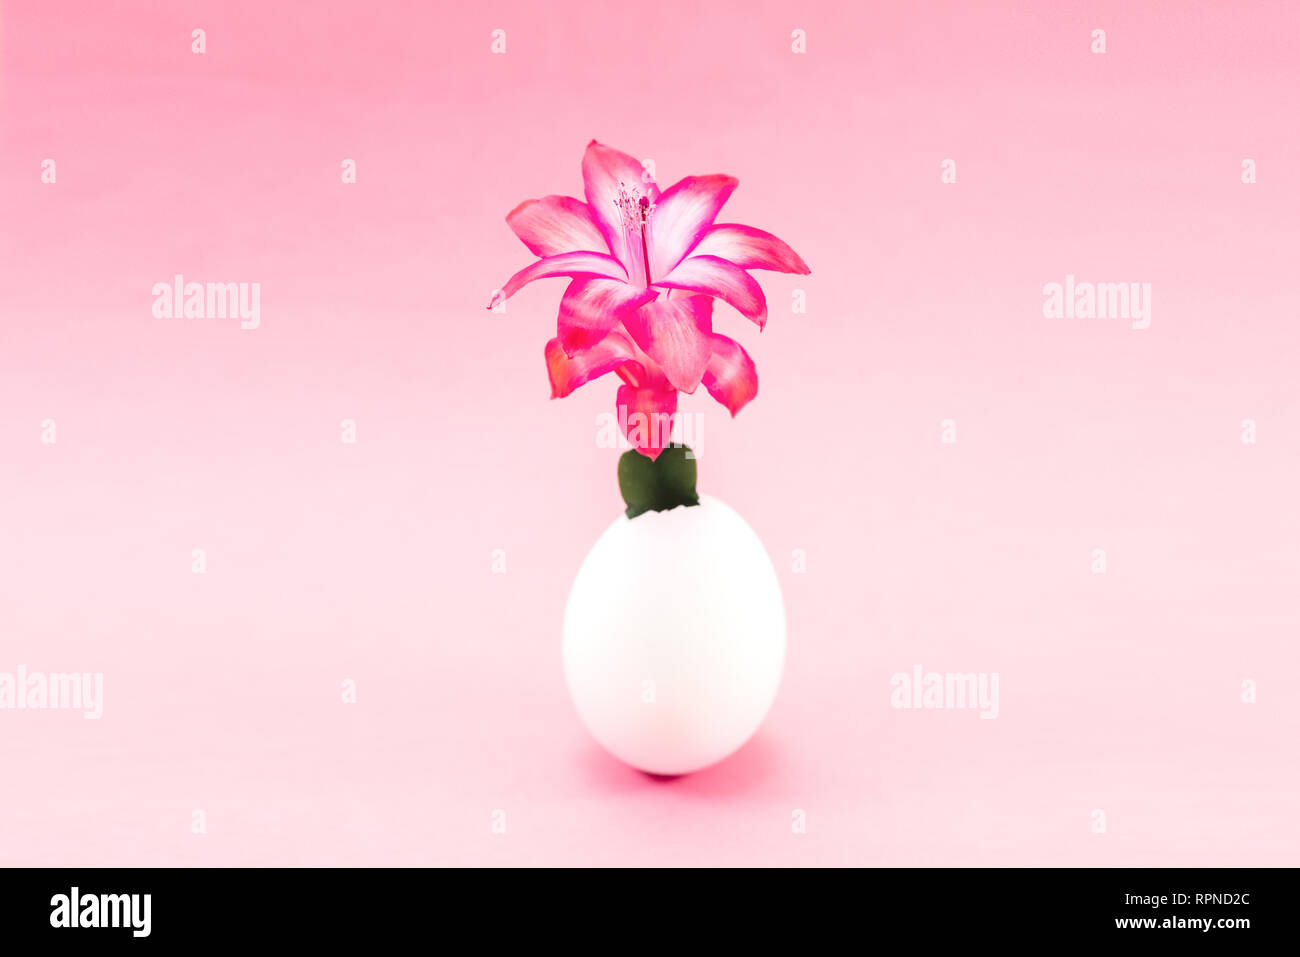 red flower growing in an egg shell concept. pink background Stock Photo